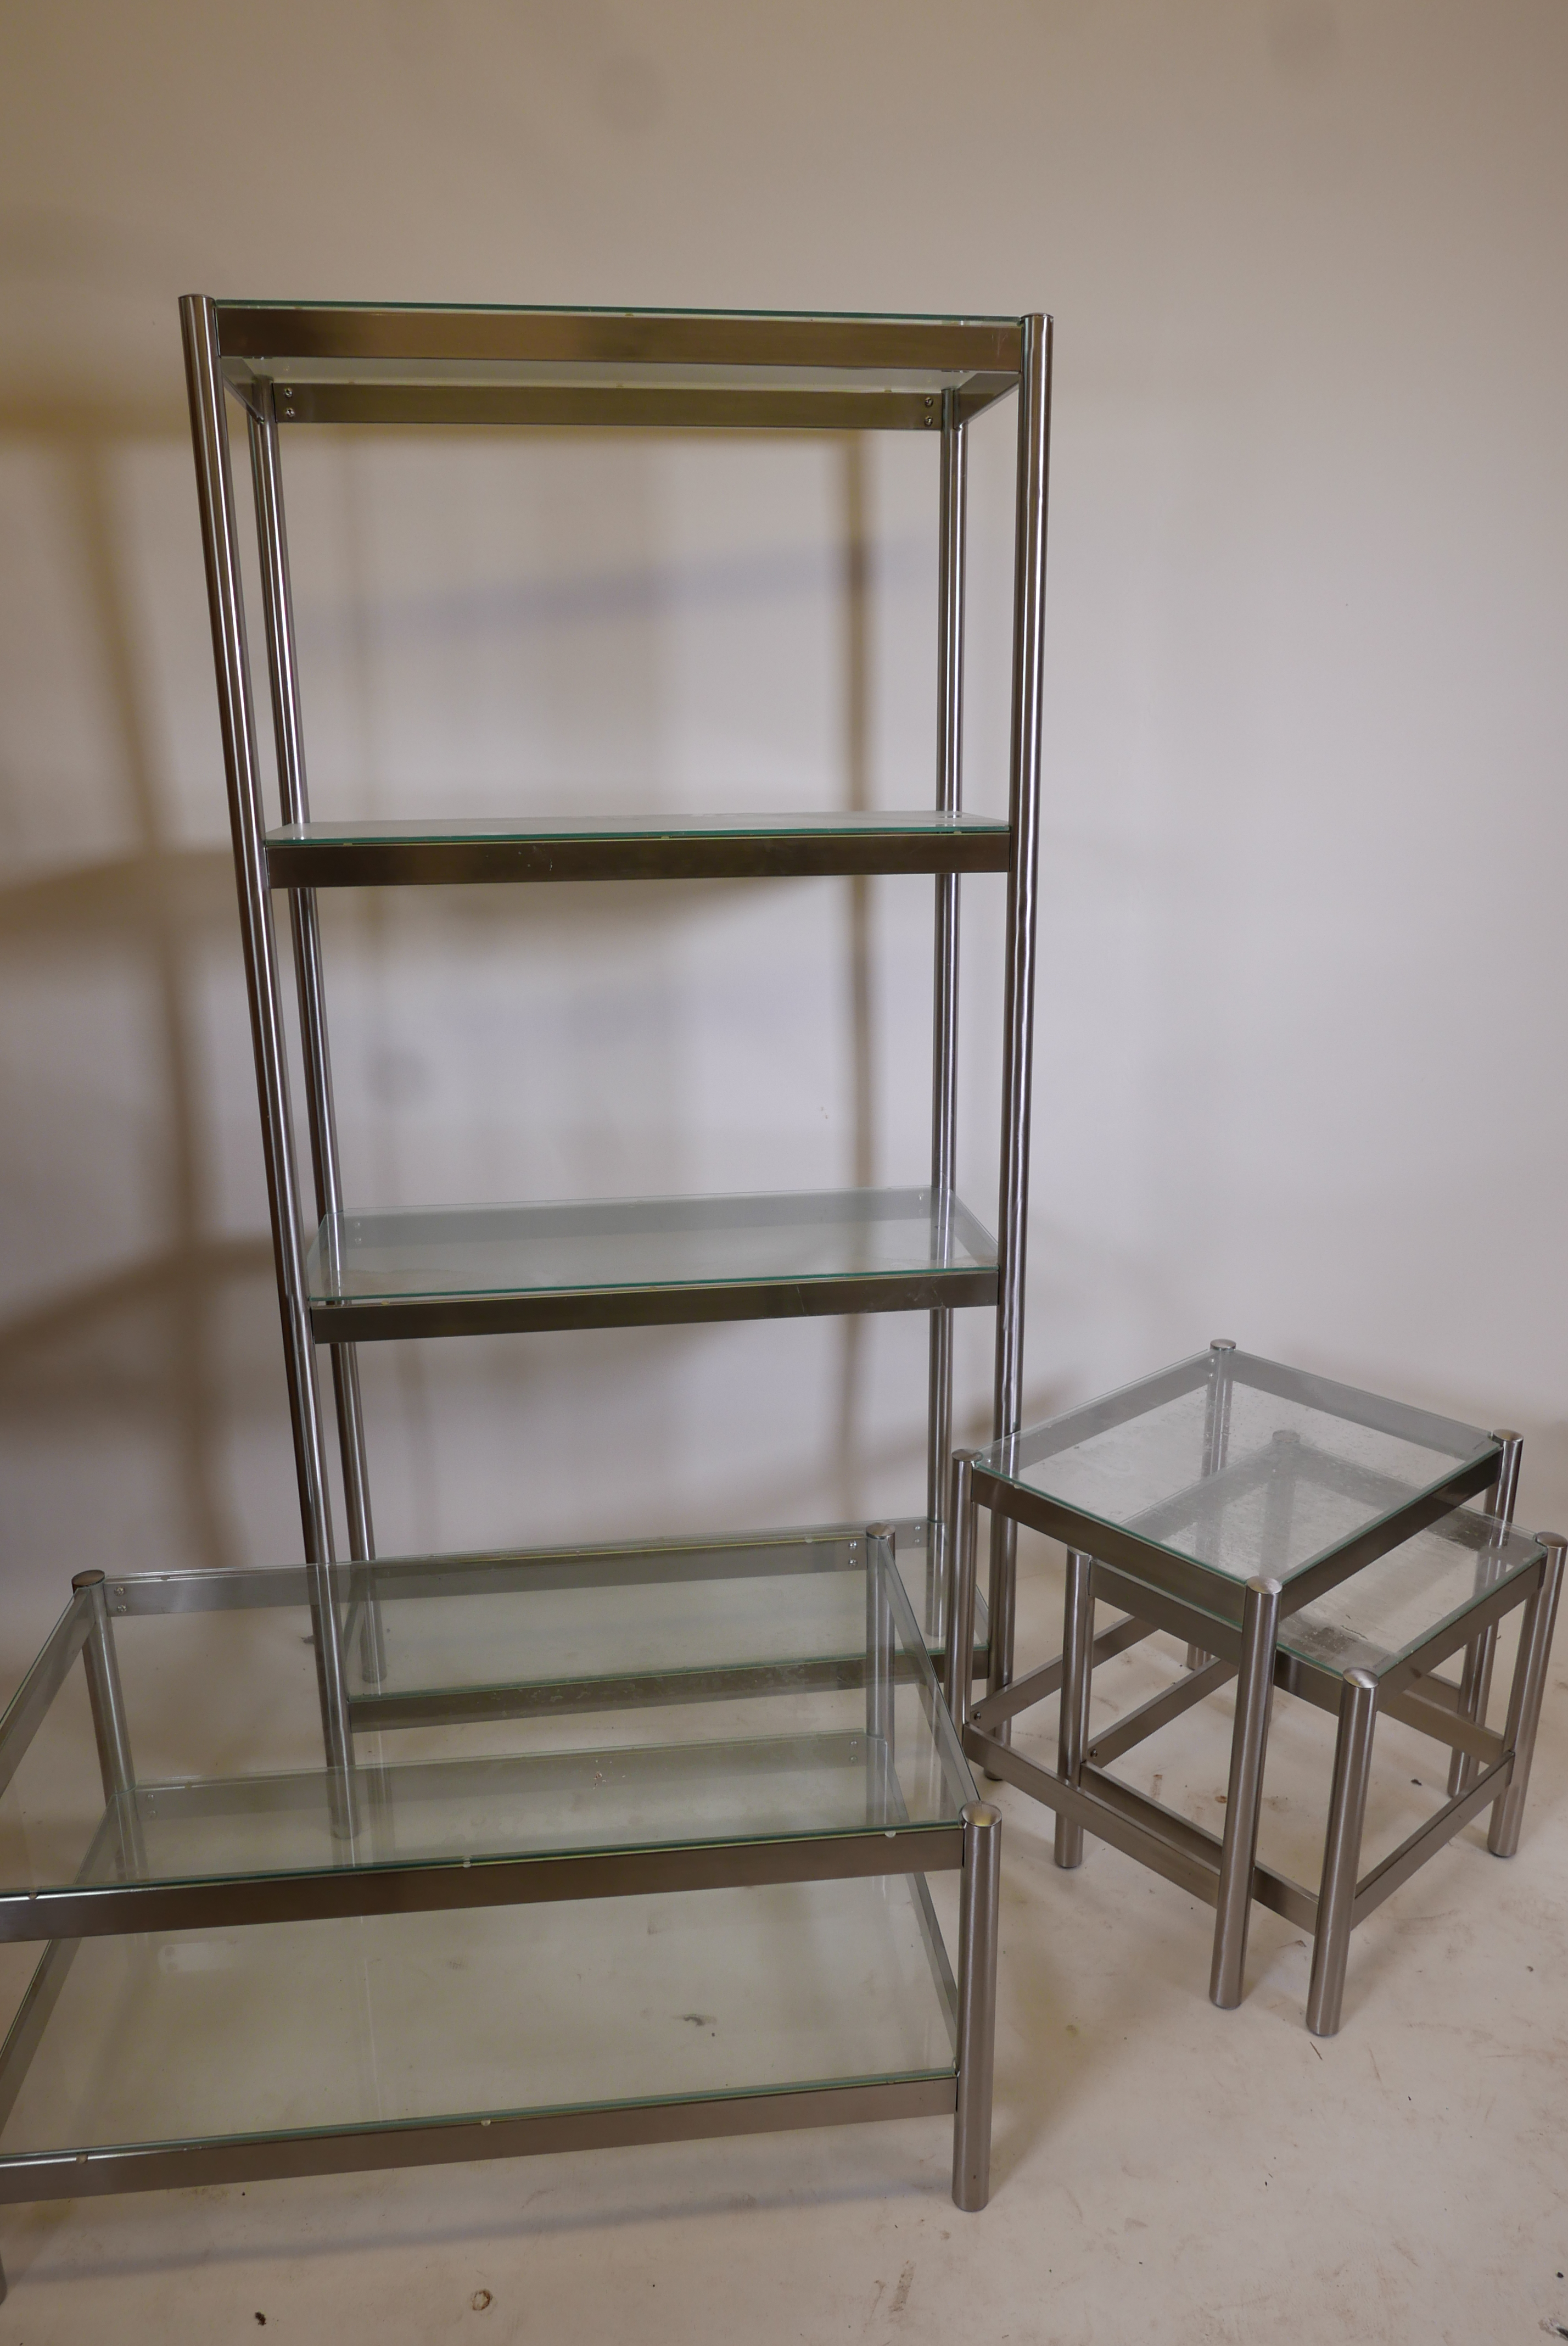 A contemporary brushed steel open display unit with glass shelves and matching occasional table, 31"